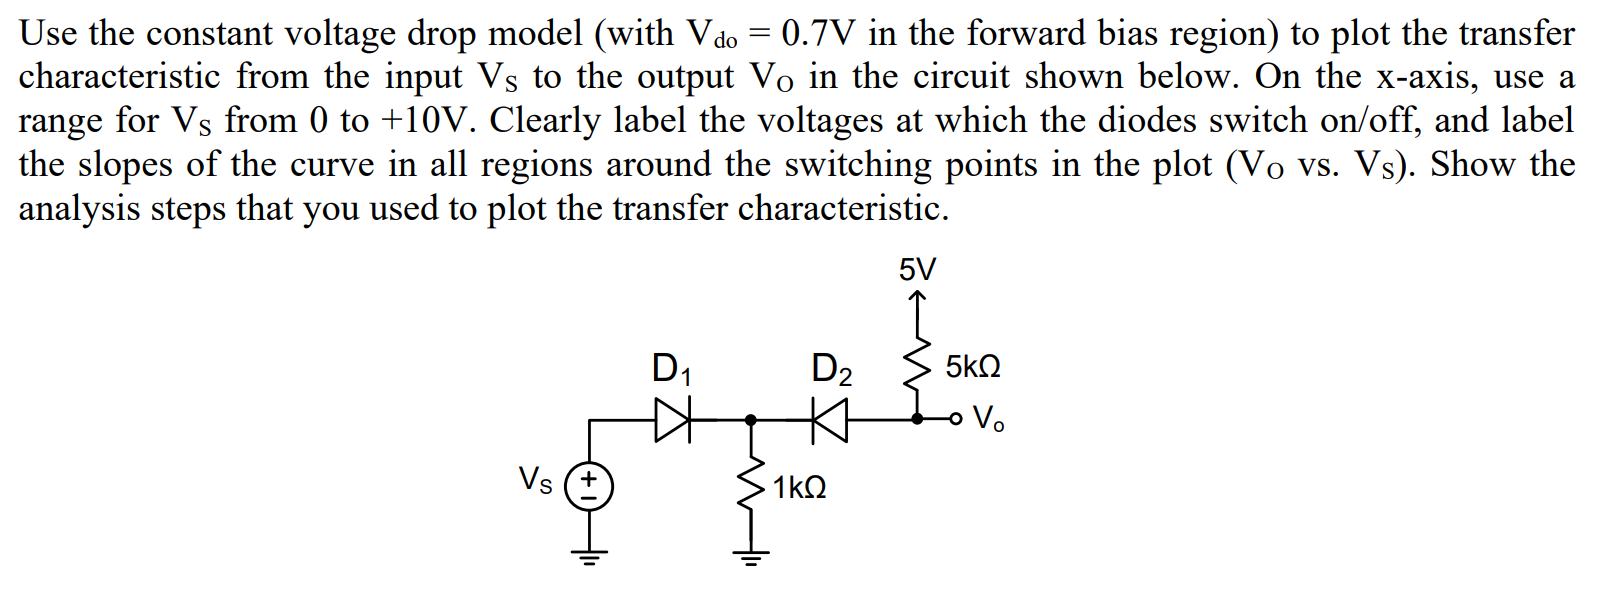 Use the constant voltage drop model (with Vdo = 0.7V in the forward bias region) to plot the transfer
characteristic from the input Vs to the output Vo in the circuit shown below. On the x-axis, use a
range for Vs from 0 to +10V. Clearly label the voltages at which the diodes switch on/off, and label
the slopes of the curve in all regions around the switching points in the plot (Vo vs. Vs). Show the
analysis steps that you used to plot the transfer characteristic.
5V
D1
D2
5k2
o V.
Vs (+
1kQ
